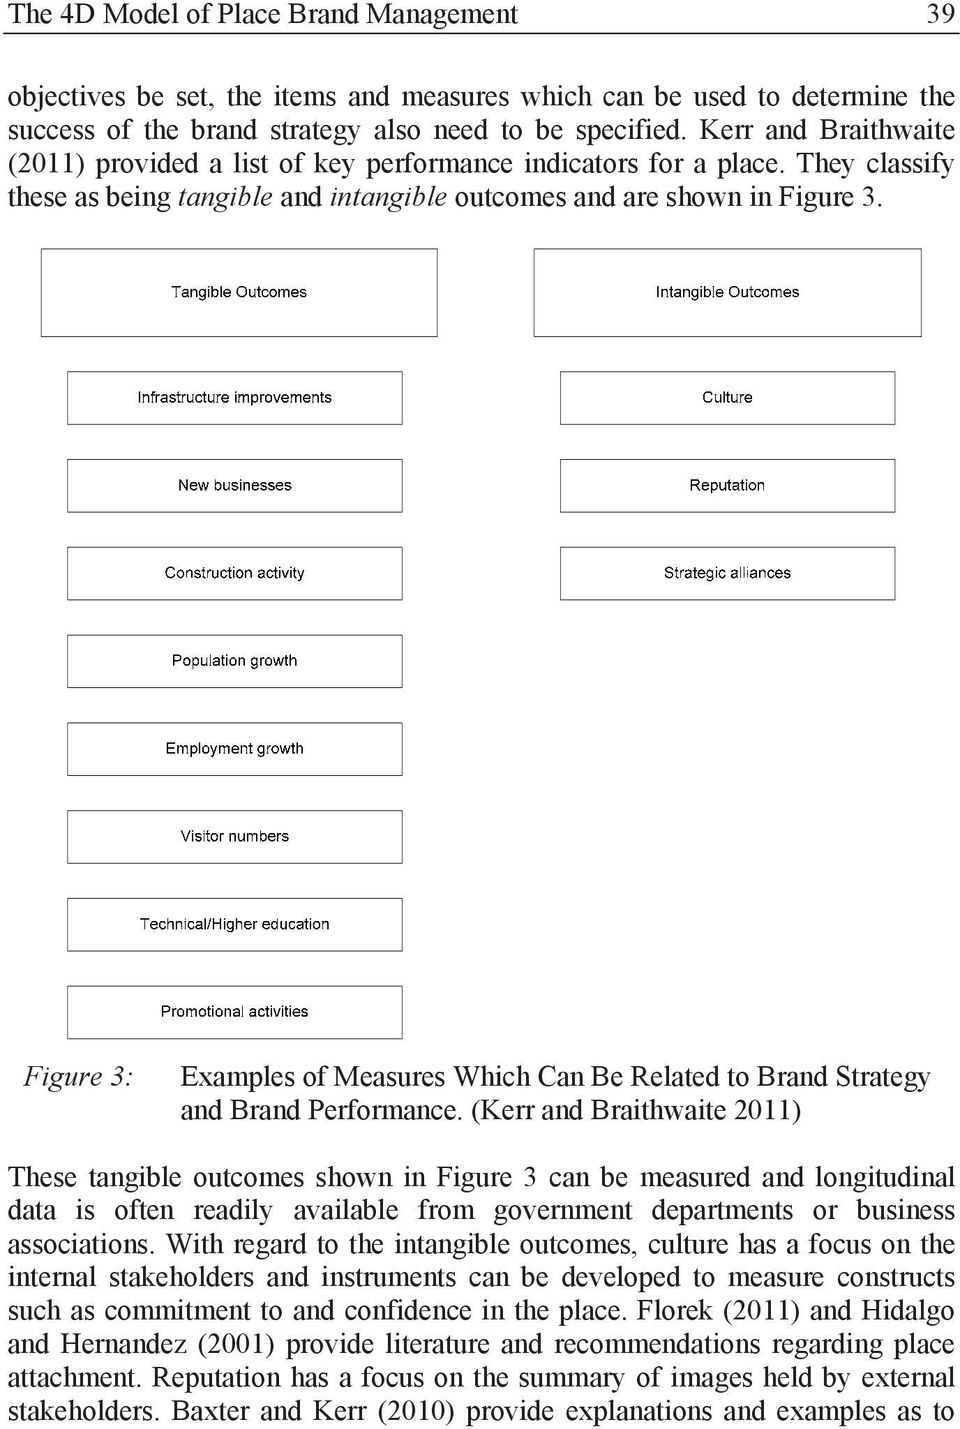 Figure 3: Examples of Measures Which Can Be Related to Brand Strategy and Brand Performance.